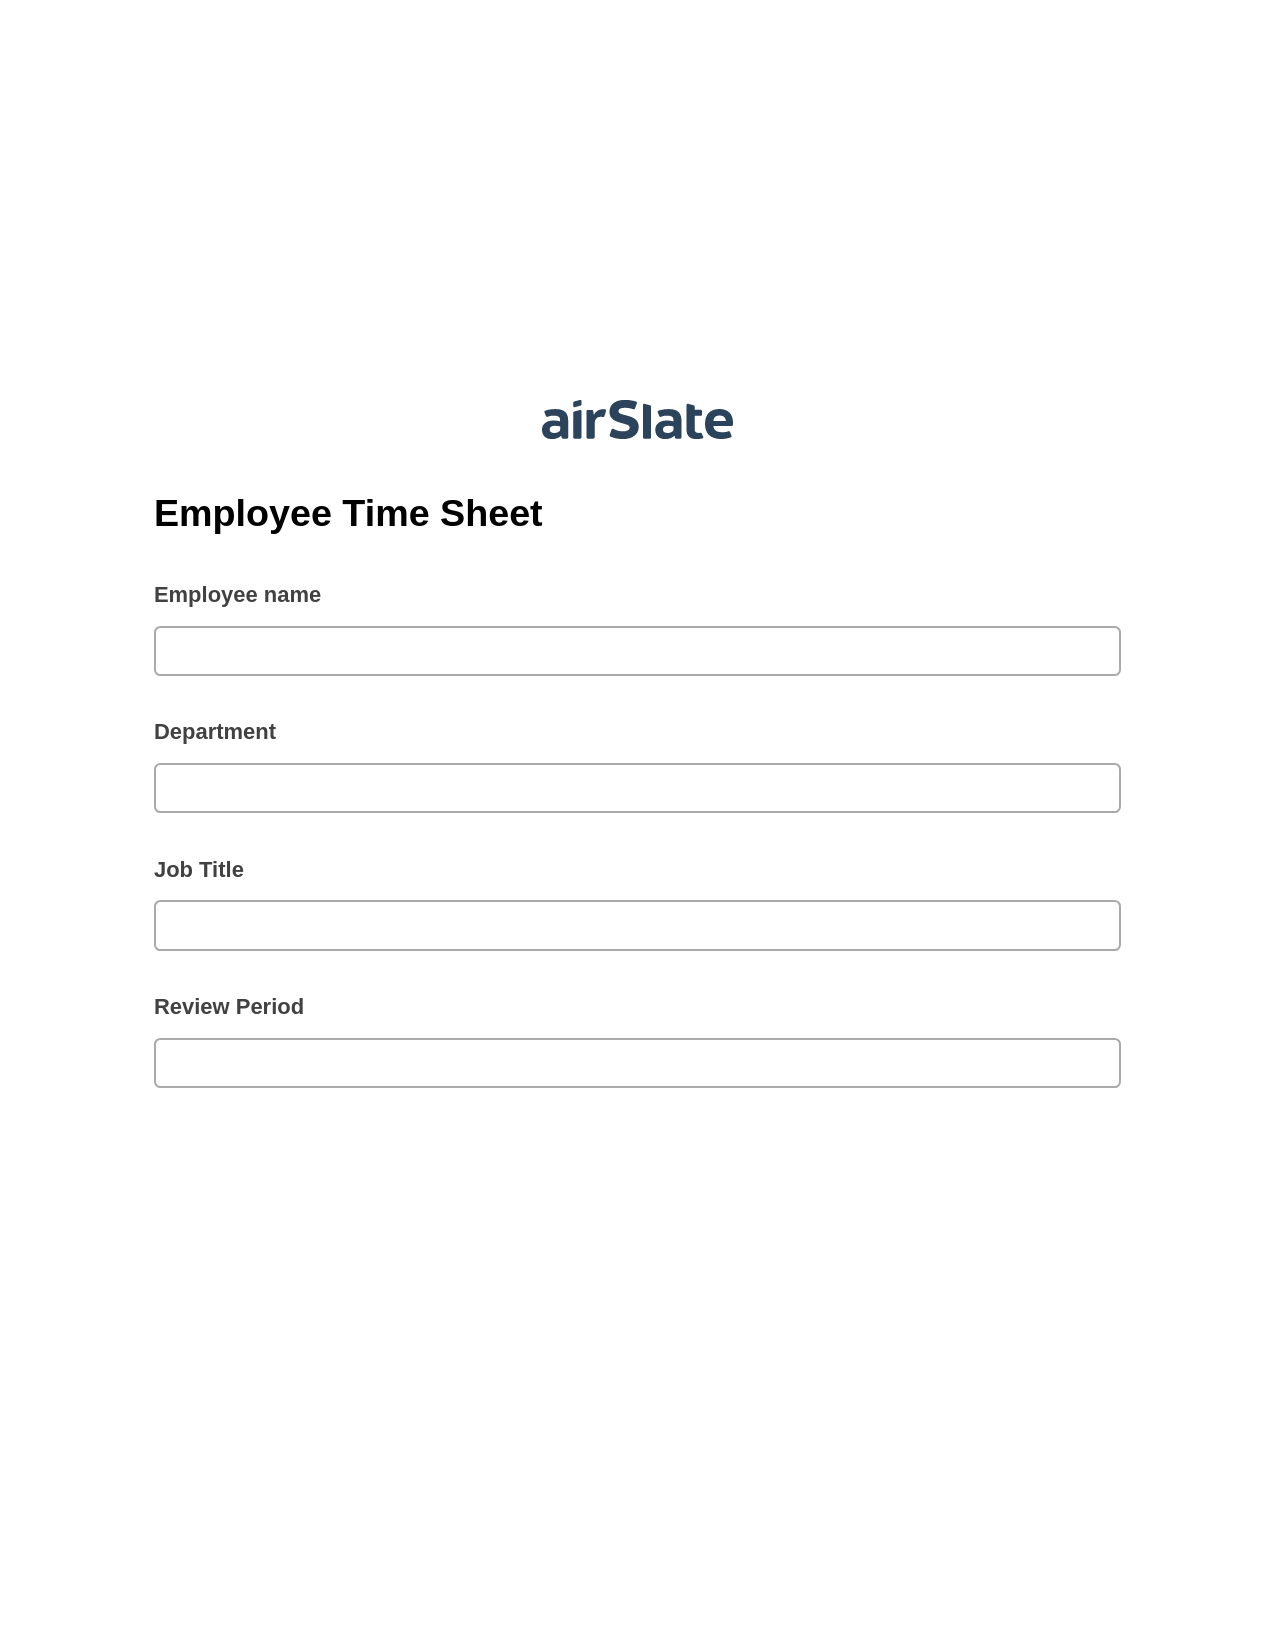 Employee Time Sheet Pre-fill Document Bot, Create Salesforce Records Bot, Export to Excel 365 Bot